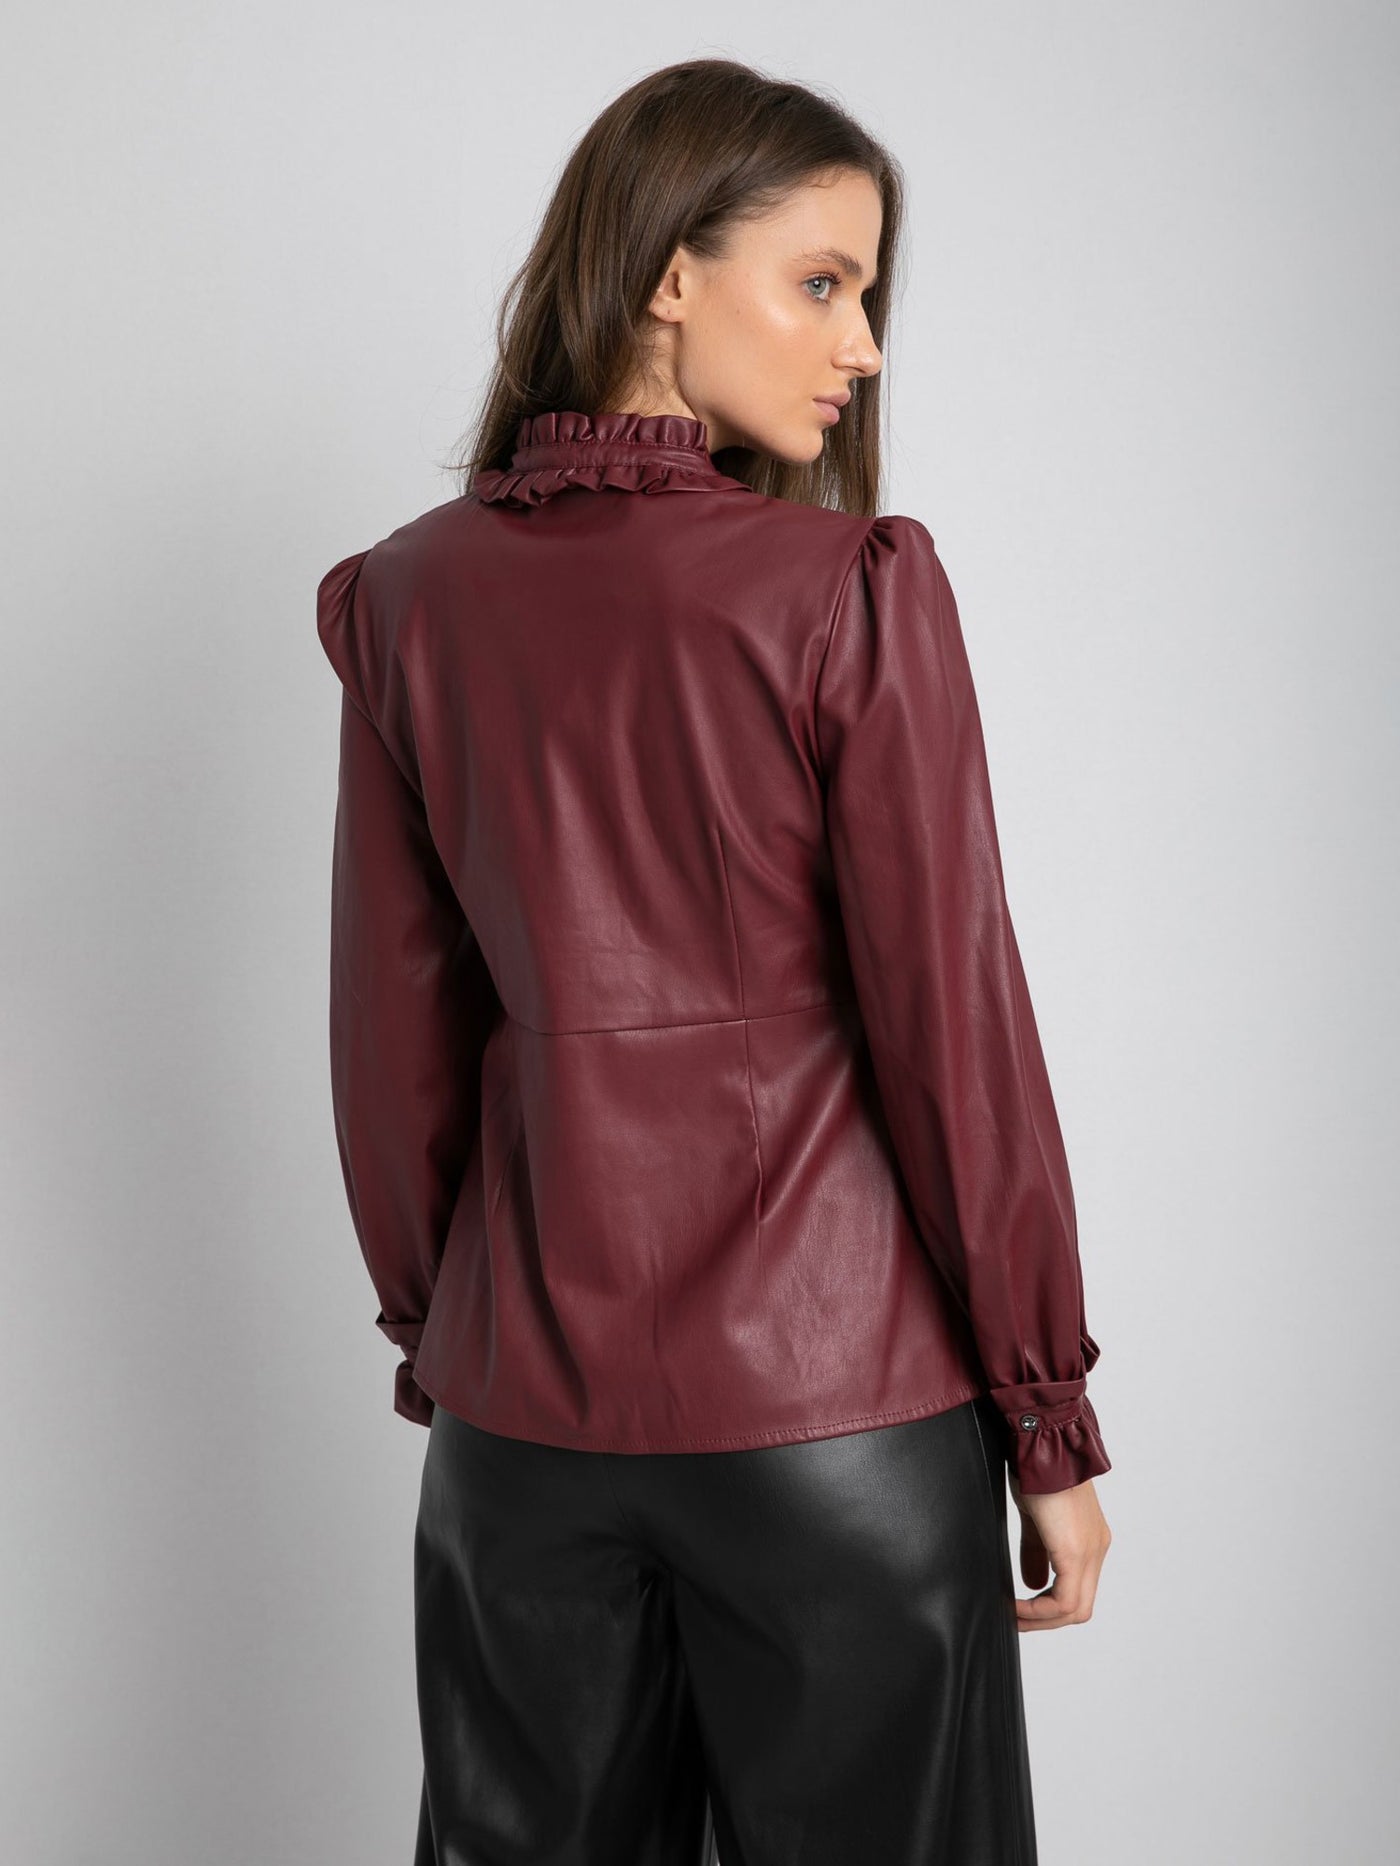 Leather Blouse - Front Ruffles